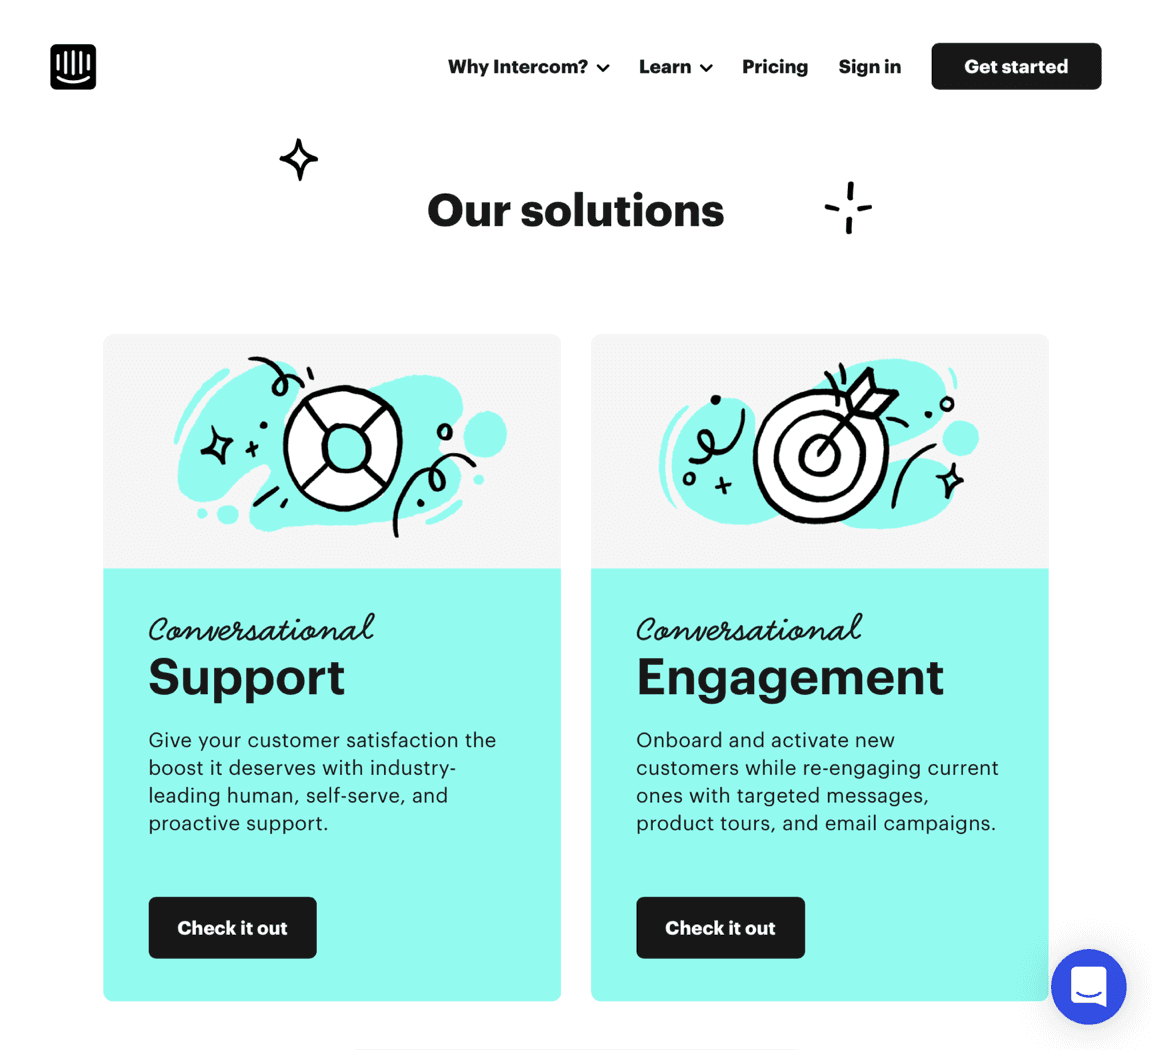 The “Our solutions” section from Intercom’s homepage